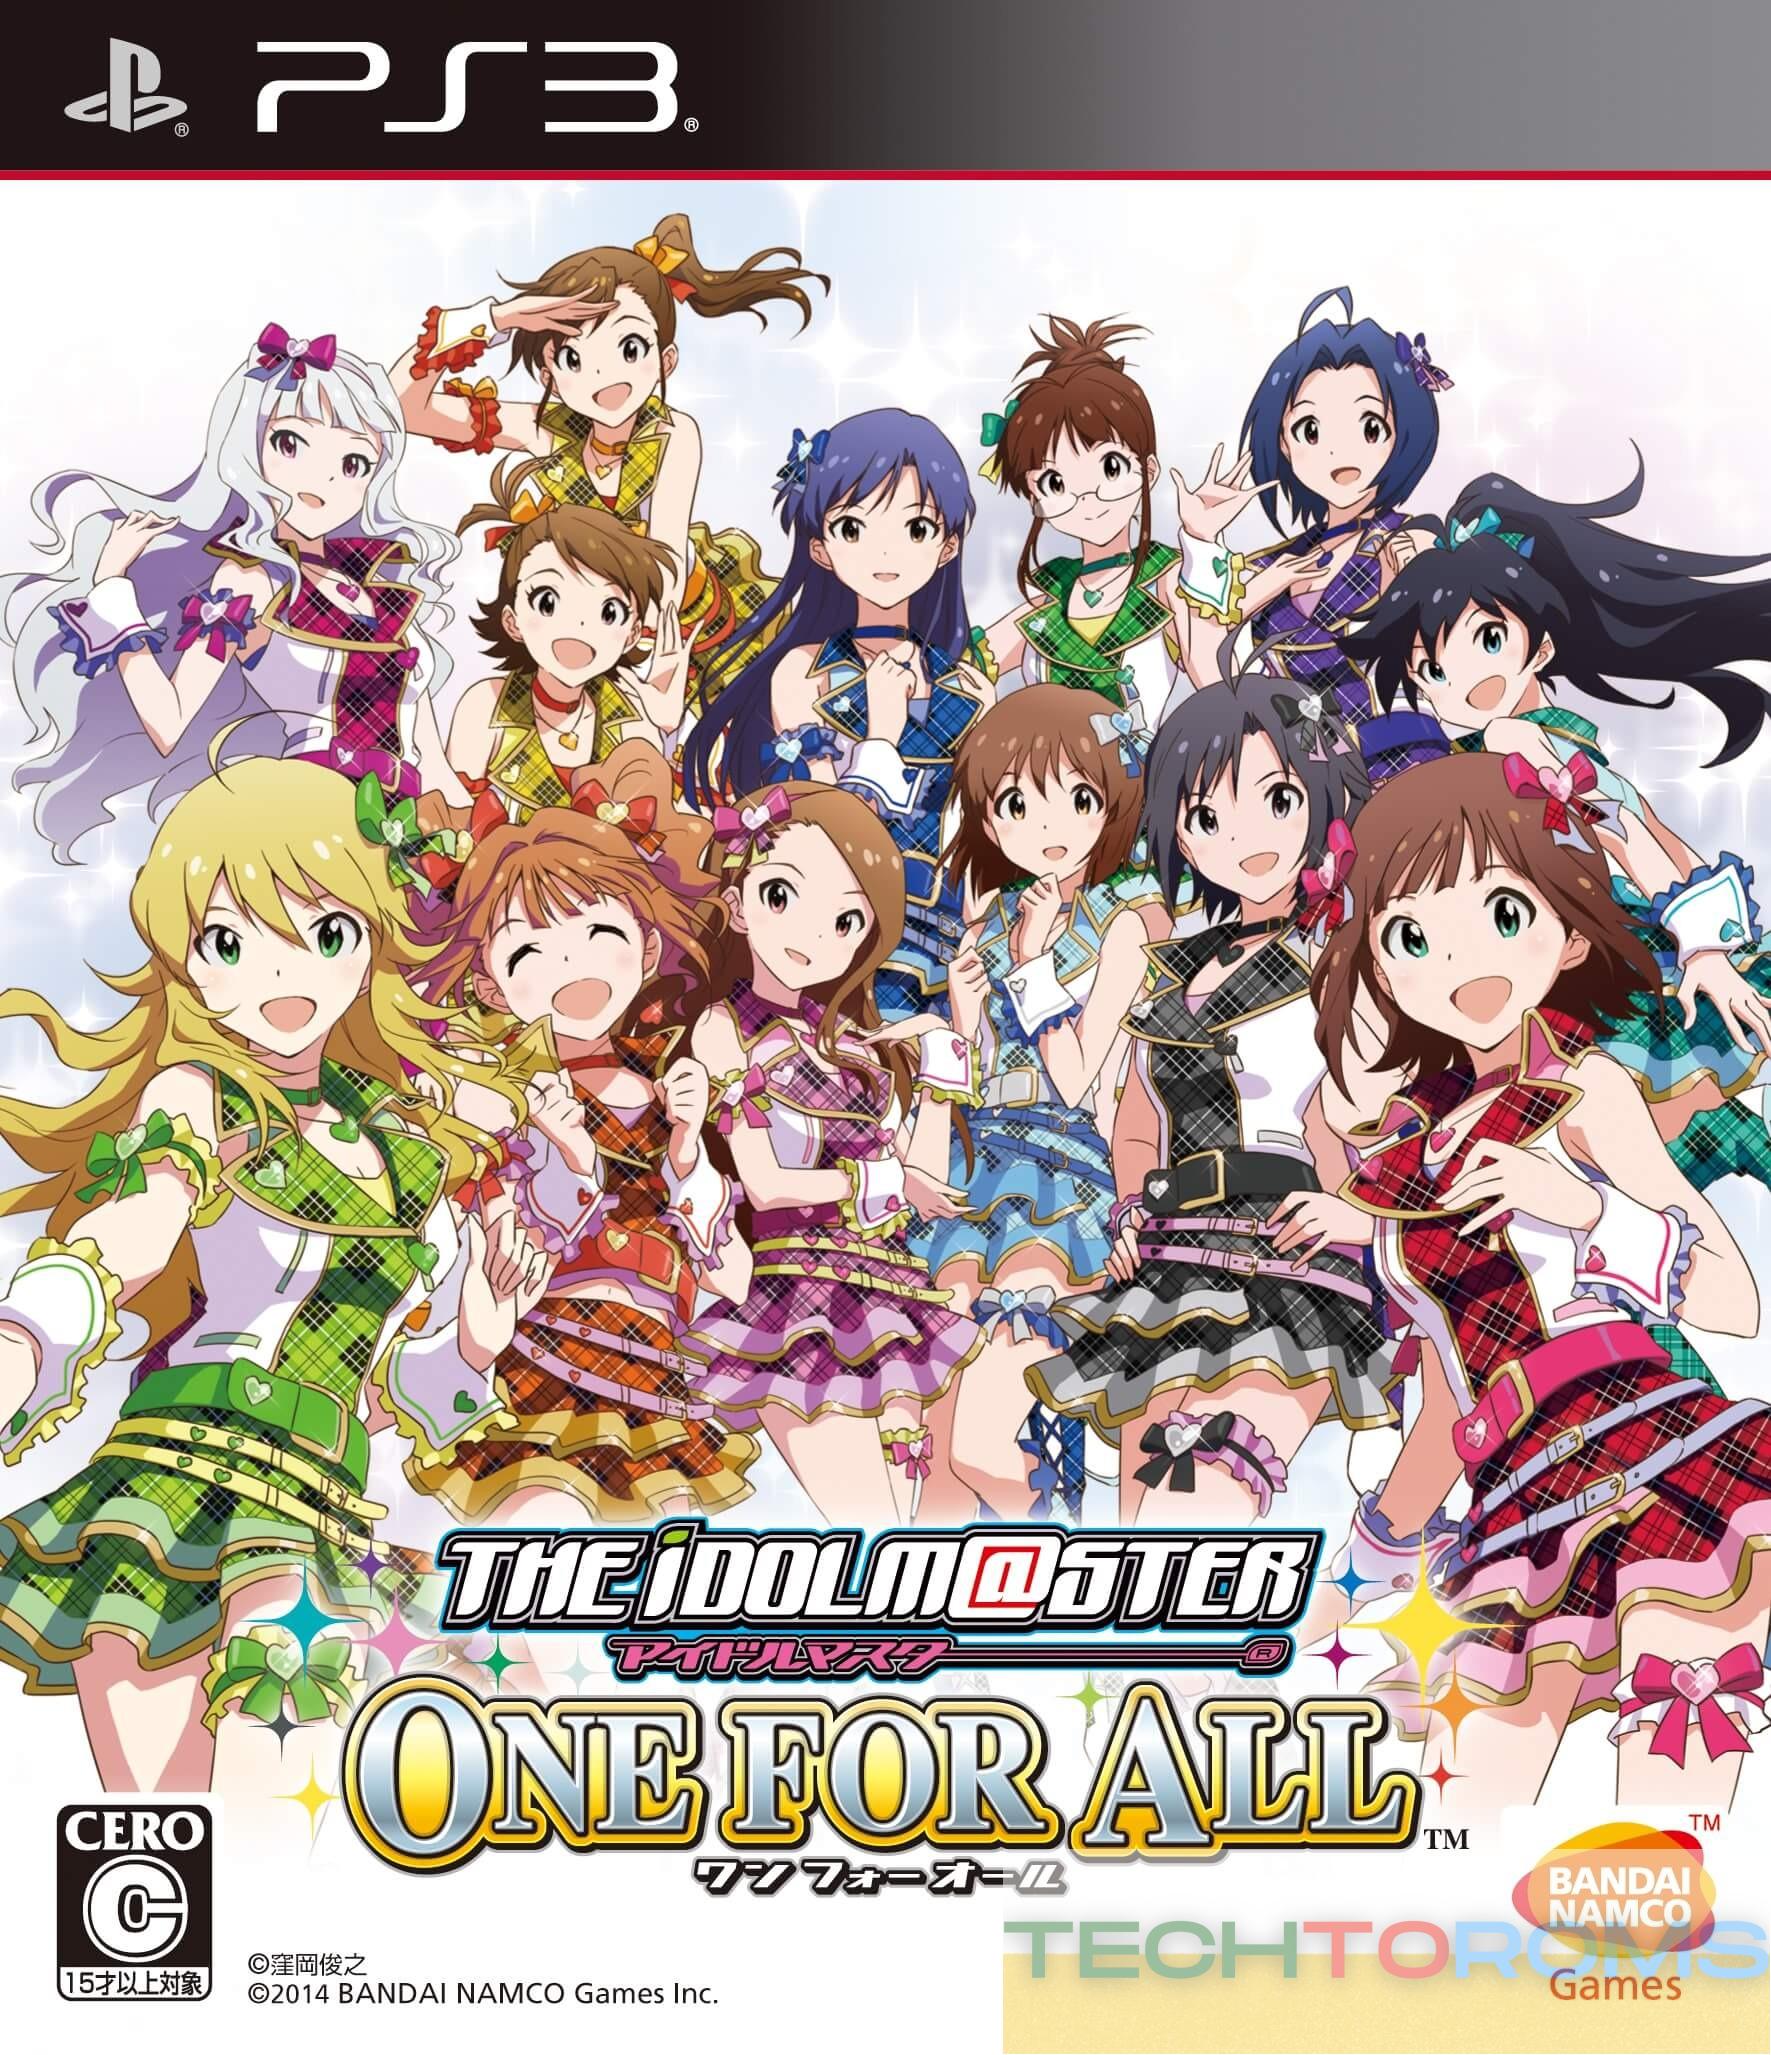 THE iDOLM@STER: One for All